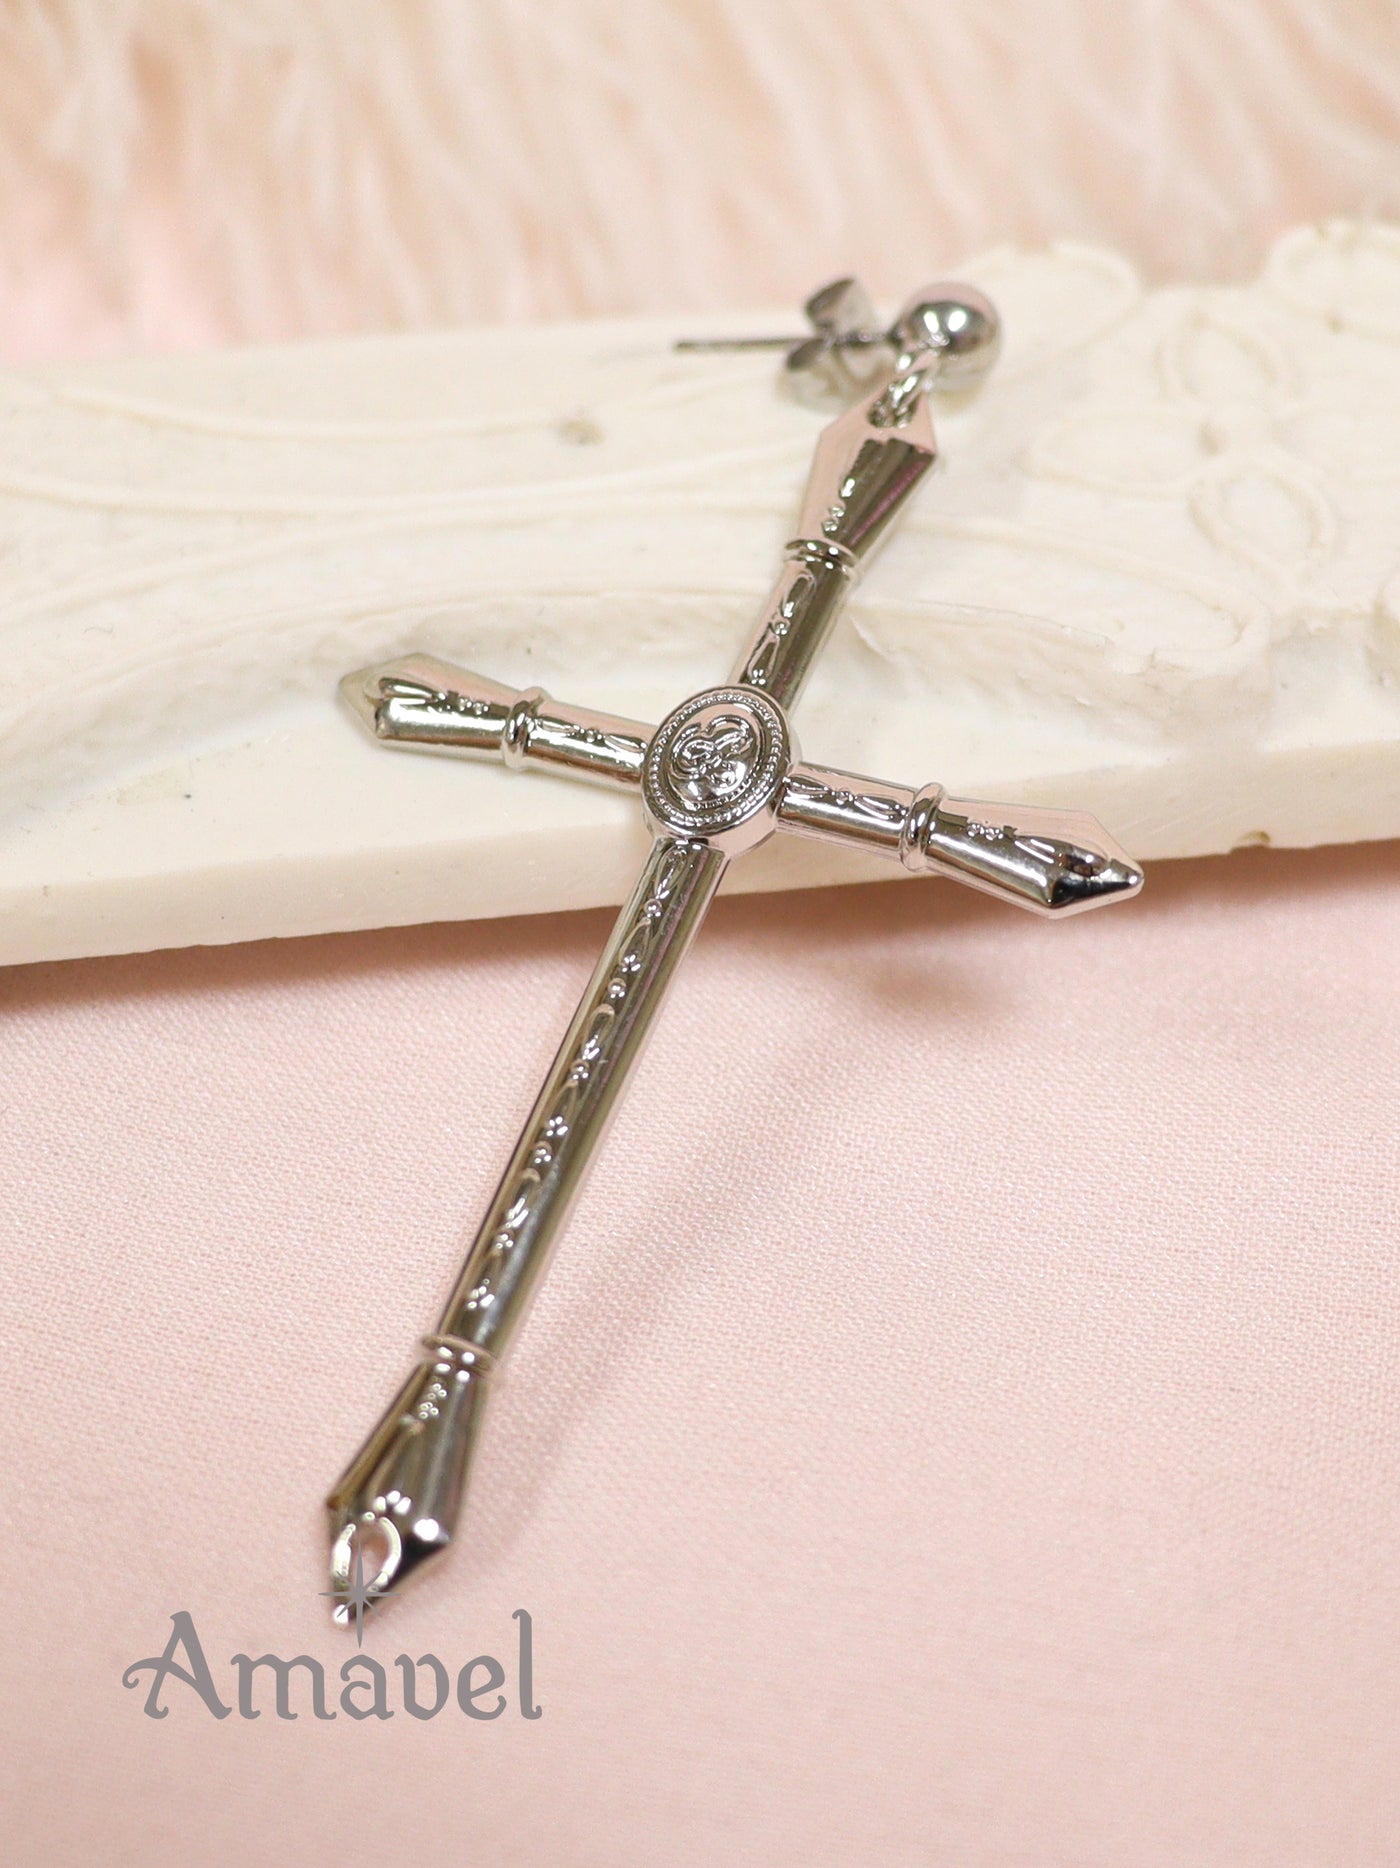 Stash Necklace #pendant #necklaces #rosary #cross #snuff_necklace  #stash_necklace #cruel_intentions #jewelry | Cruel intentions, Cross pendant,  Pendant